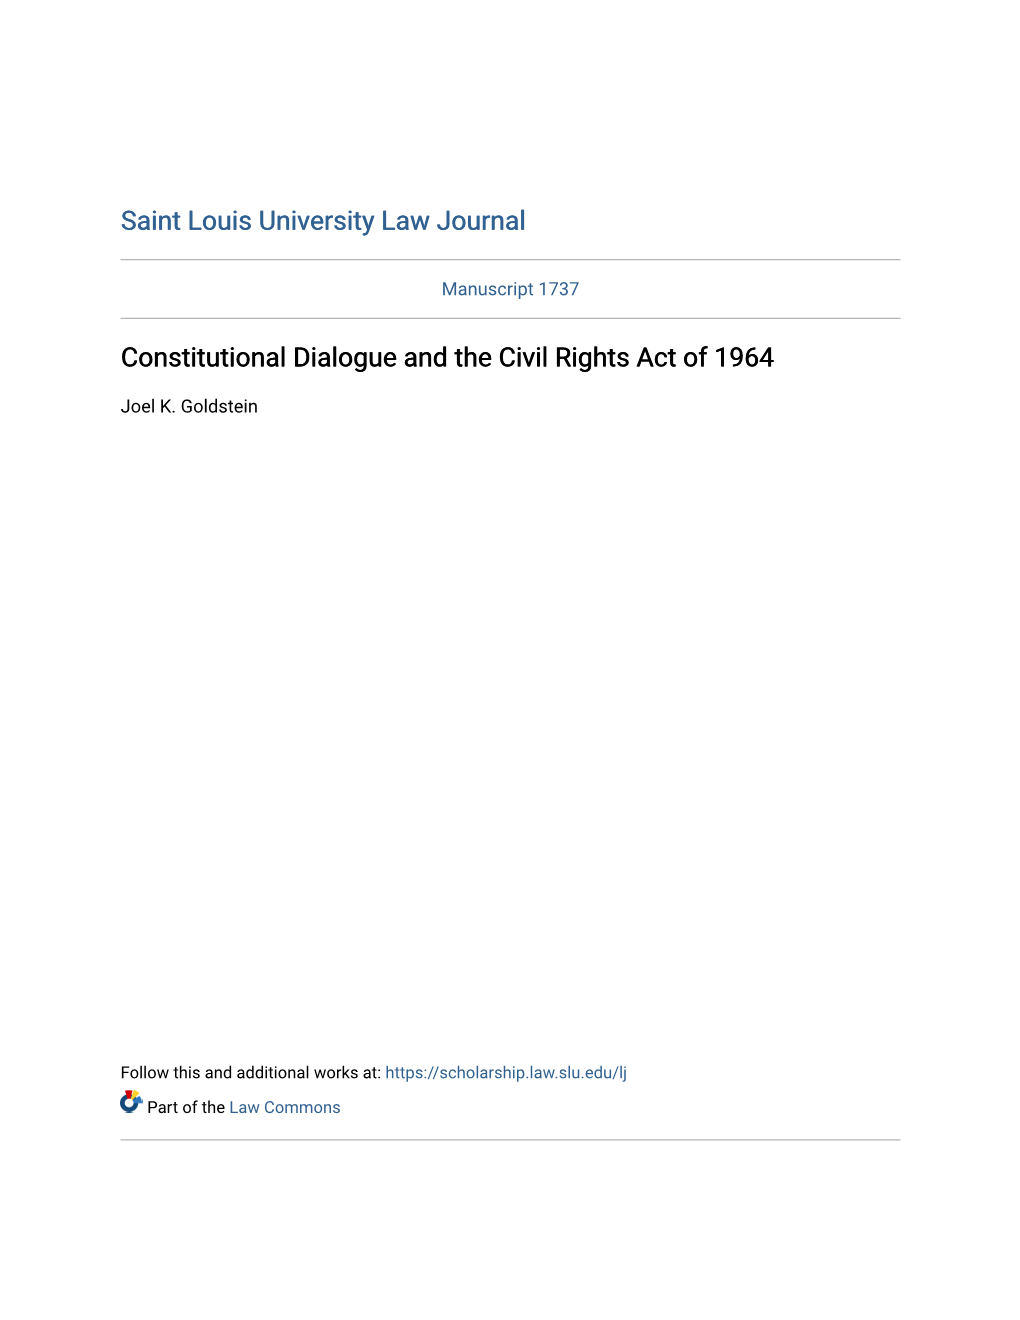 Constitutional Dialogue and the Civil Rights Act of 1964